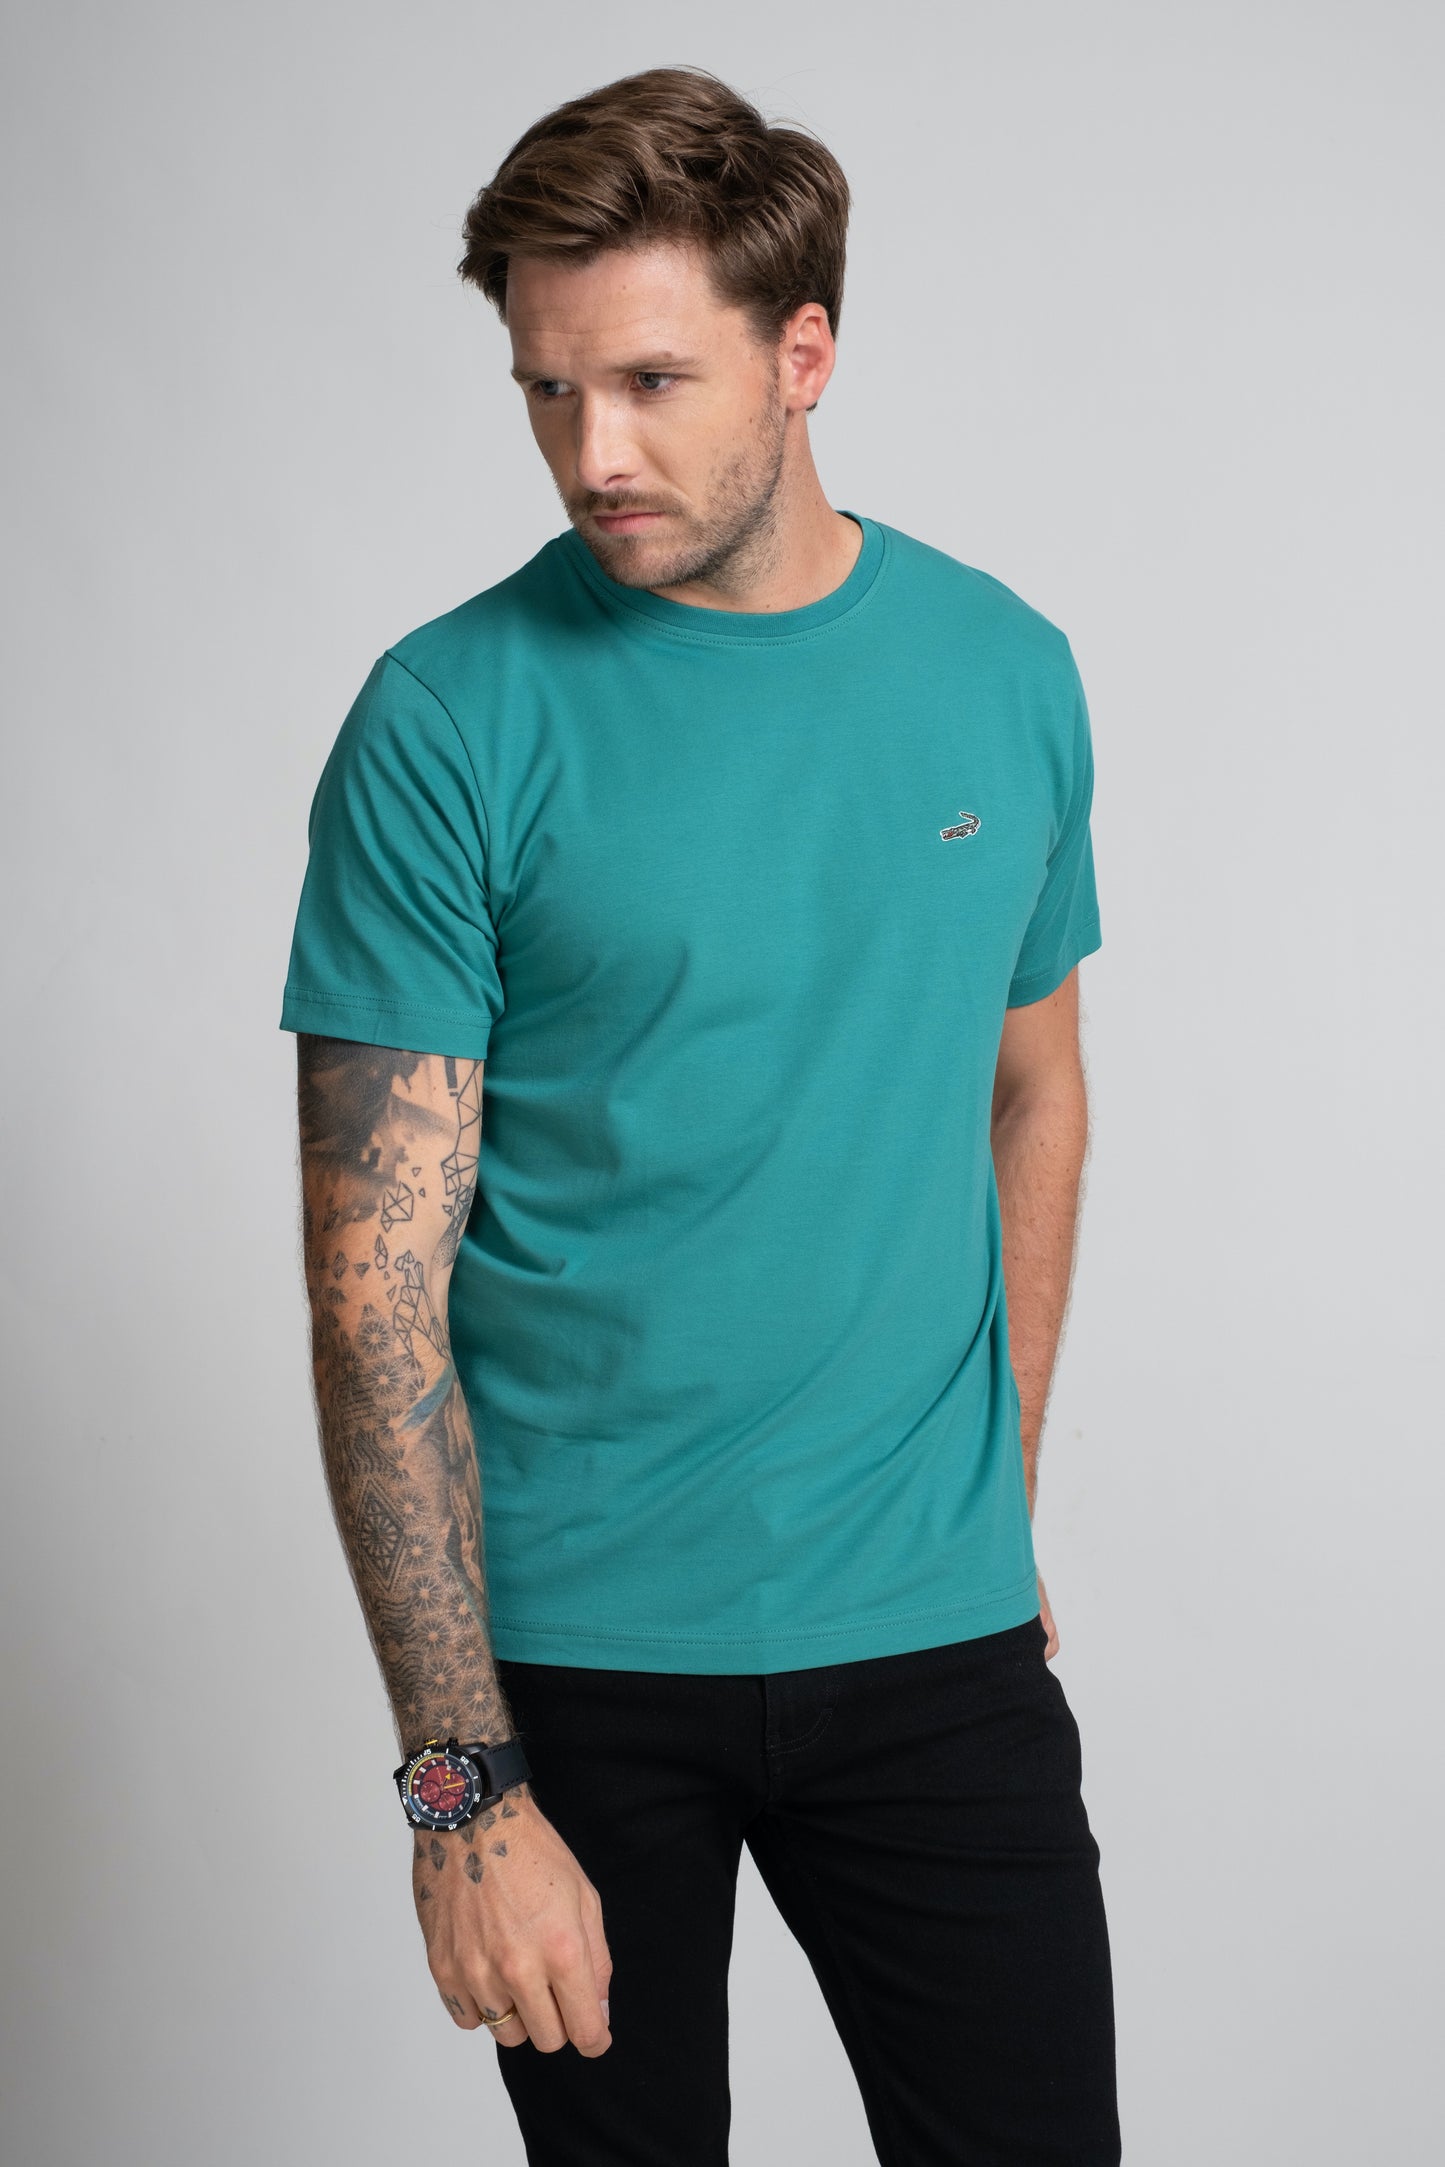 Classic Fit Short sleeves-CasualCrew Neck - GreenAlhambra